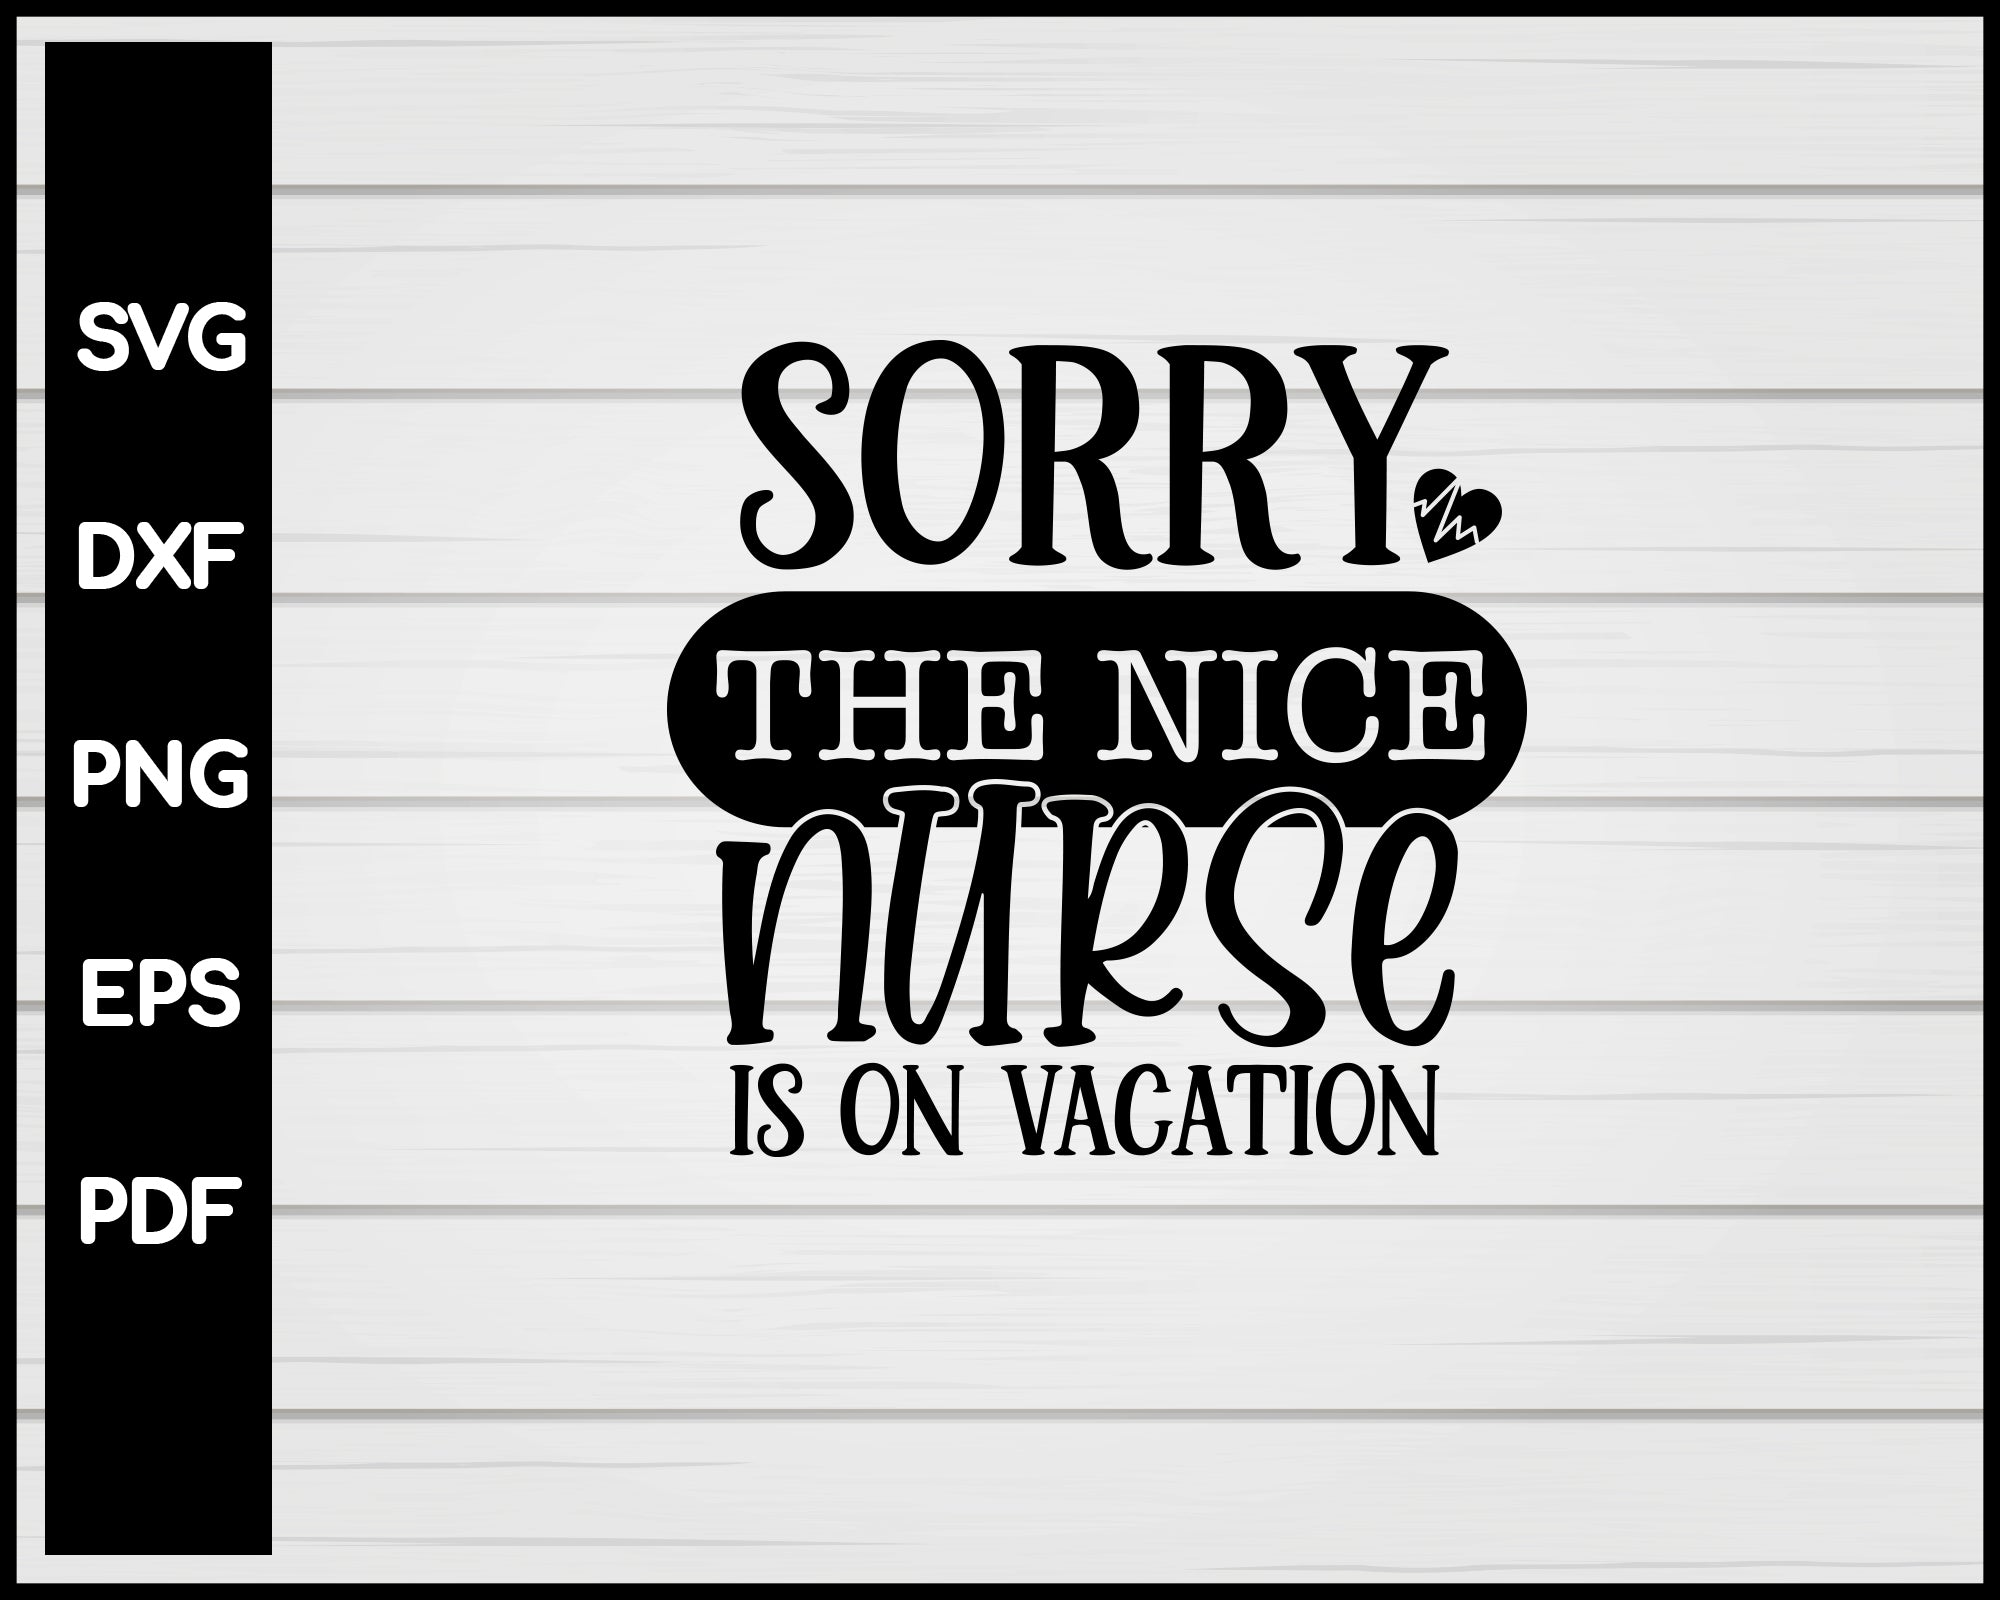 Sorry The Nice Nurse Is On Vacation svg Cut File For Cricut Silhouette eps png dxf Printable Files